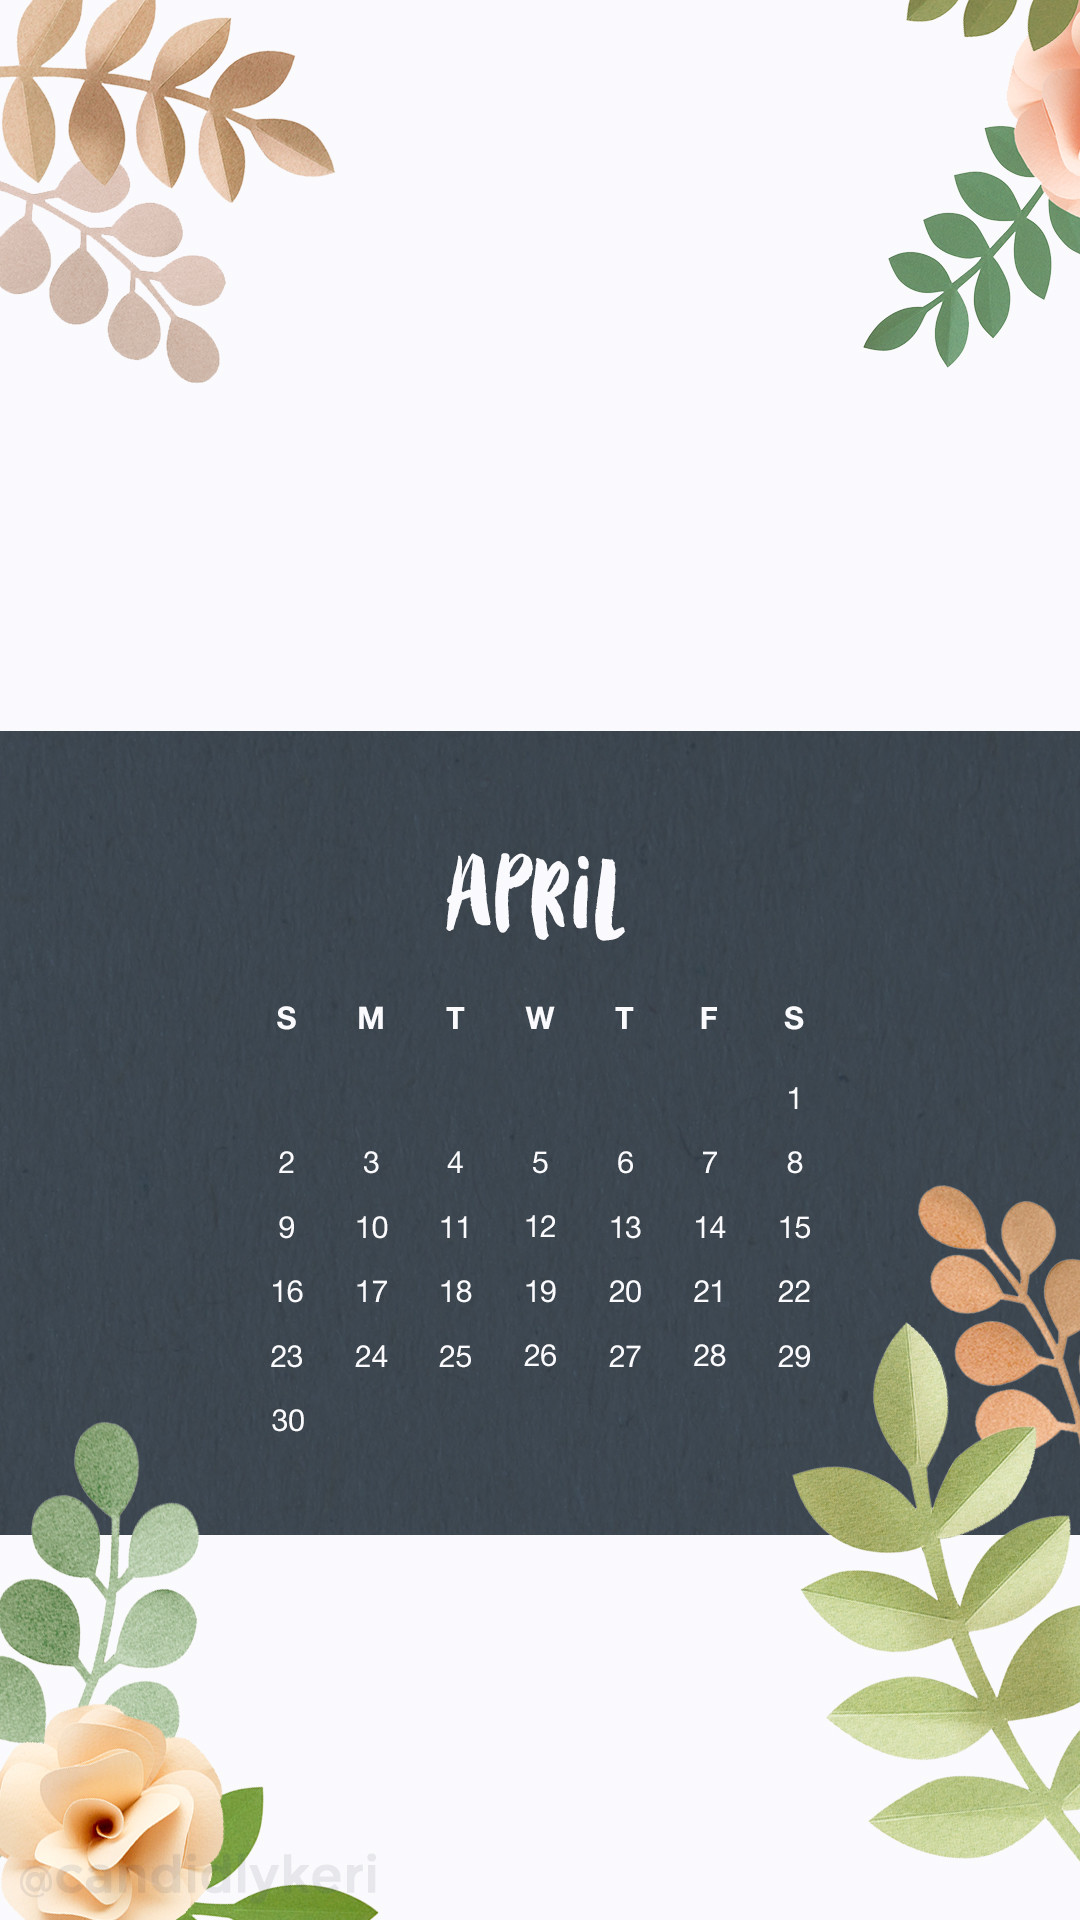 1080x1920 April calendar 2017 wallpaper you can download for free on the blog! For  any device